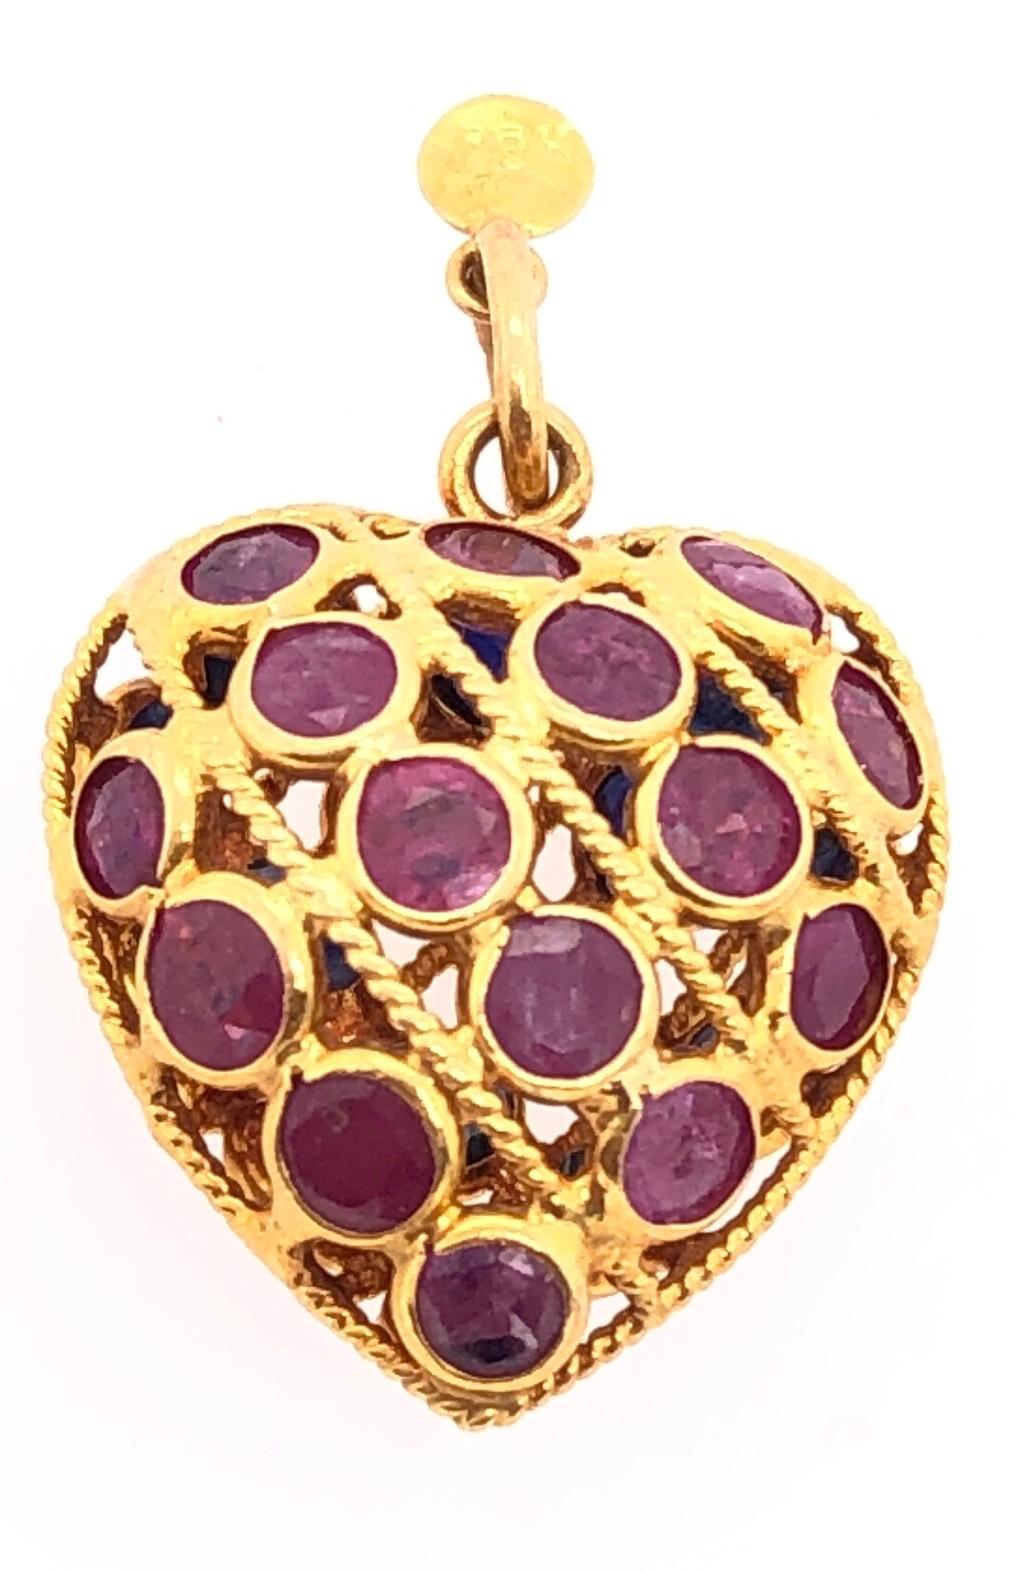 18 Karat Yellow Gold Double Sided Heart Charm / Pendant Ruby and Sapphire
2.03 grams total weight.